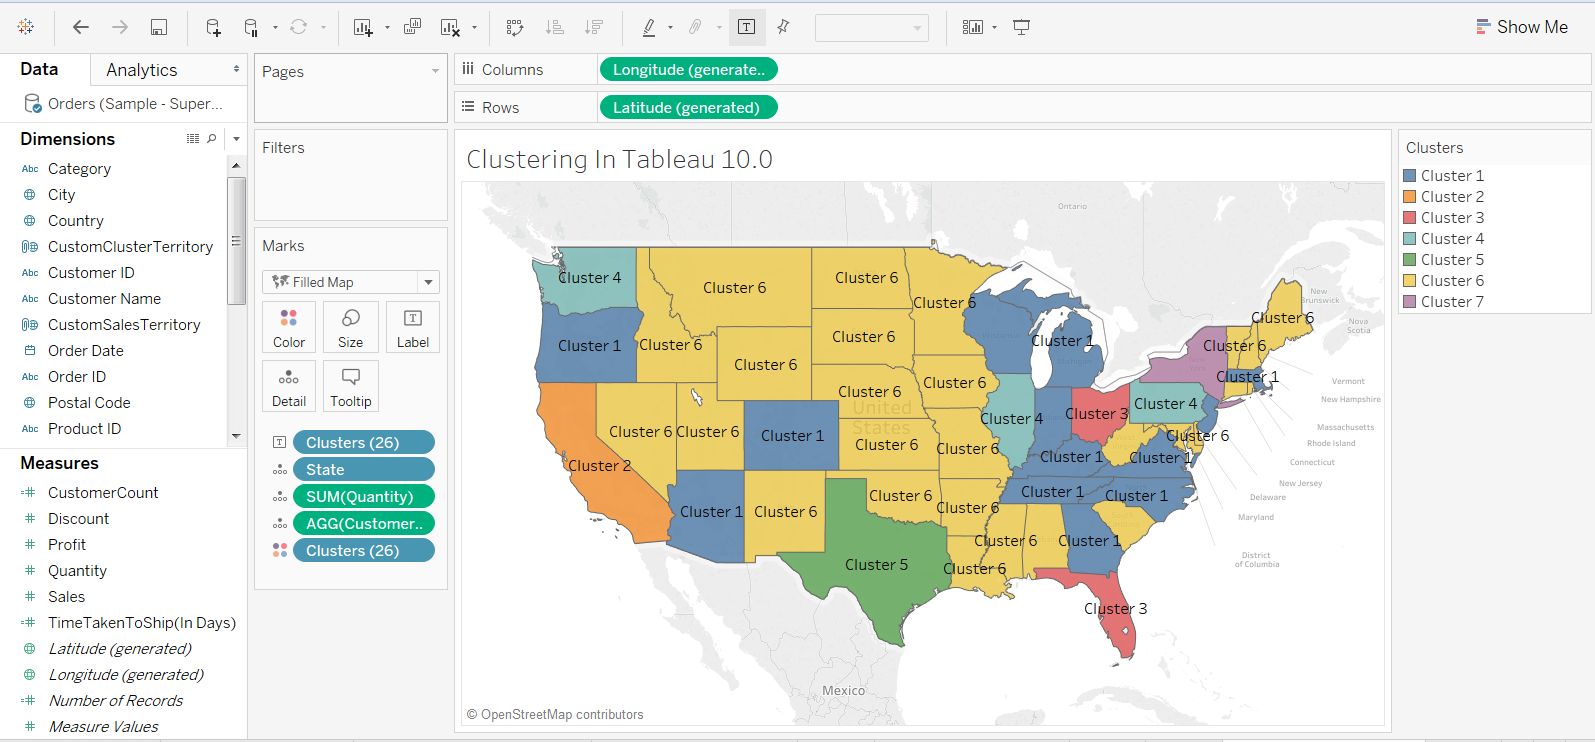 K-means Clustering in Tableau  & Visualizing Custom Sales territory based on the Analysis 39